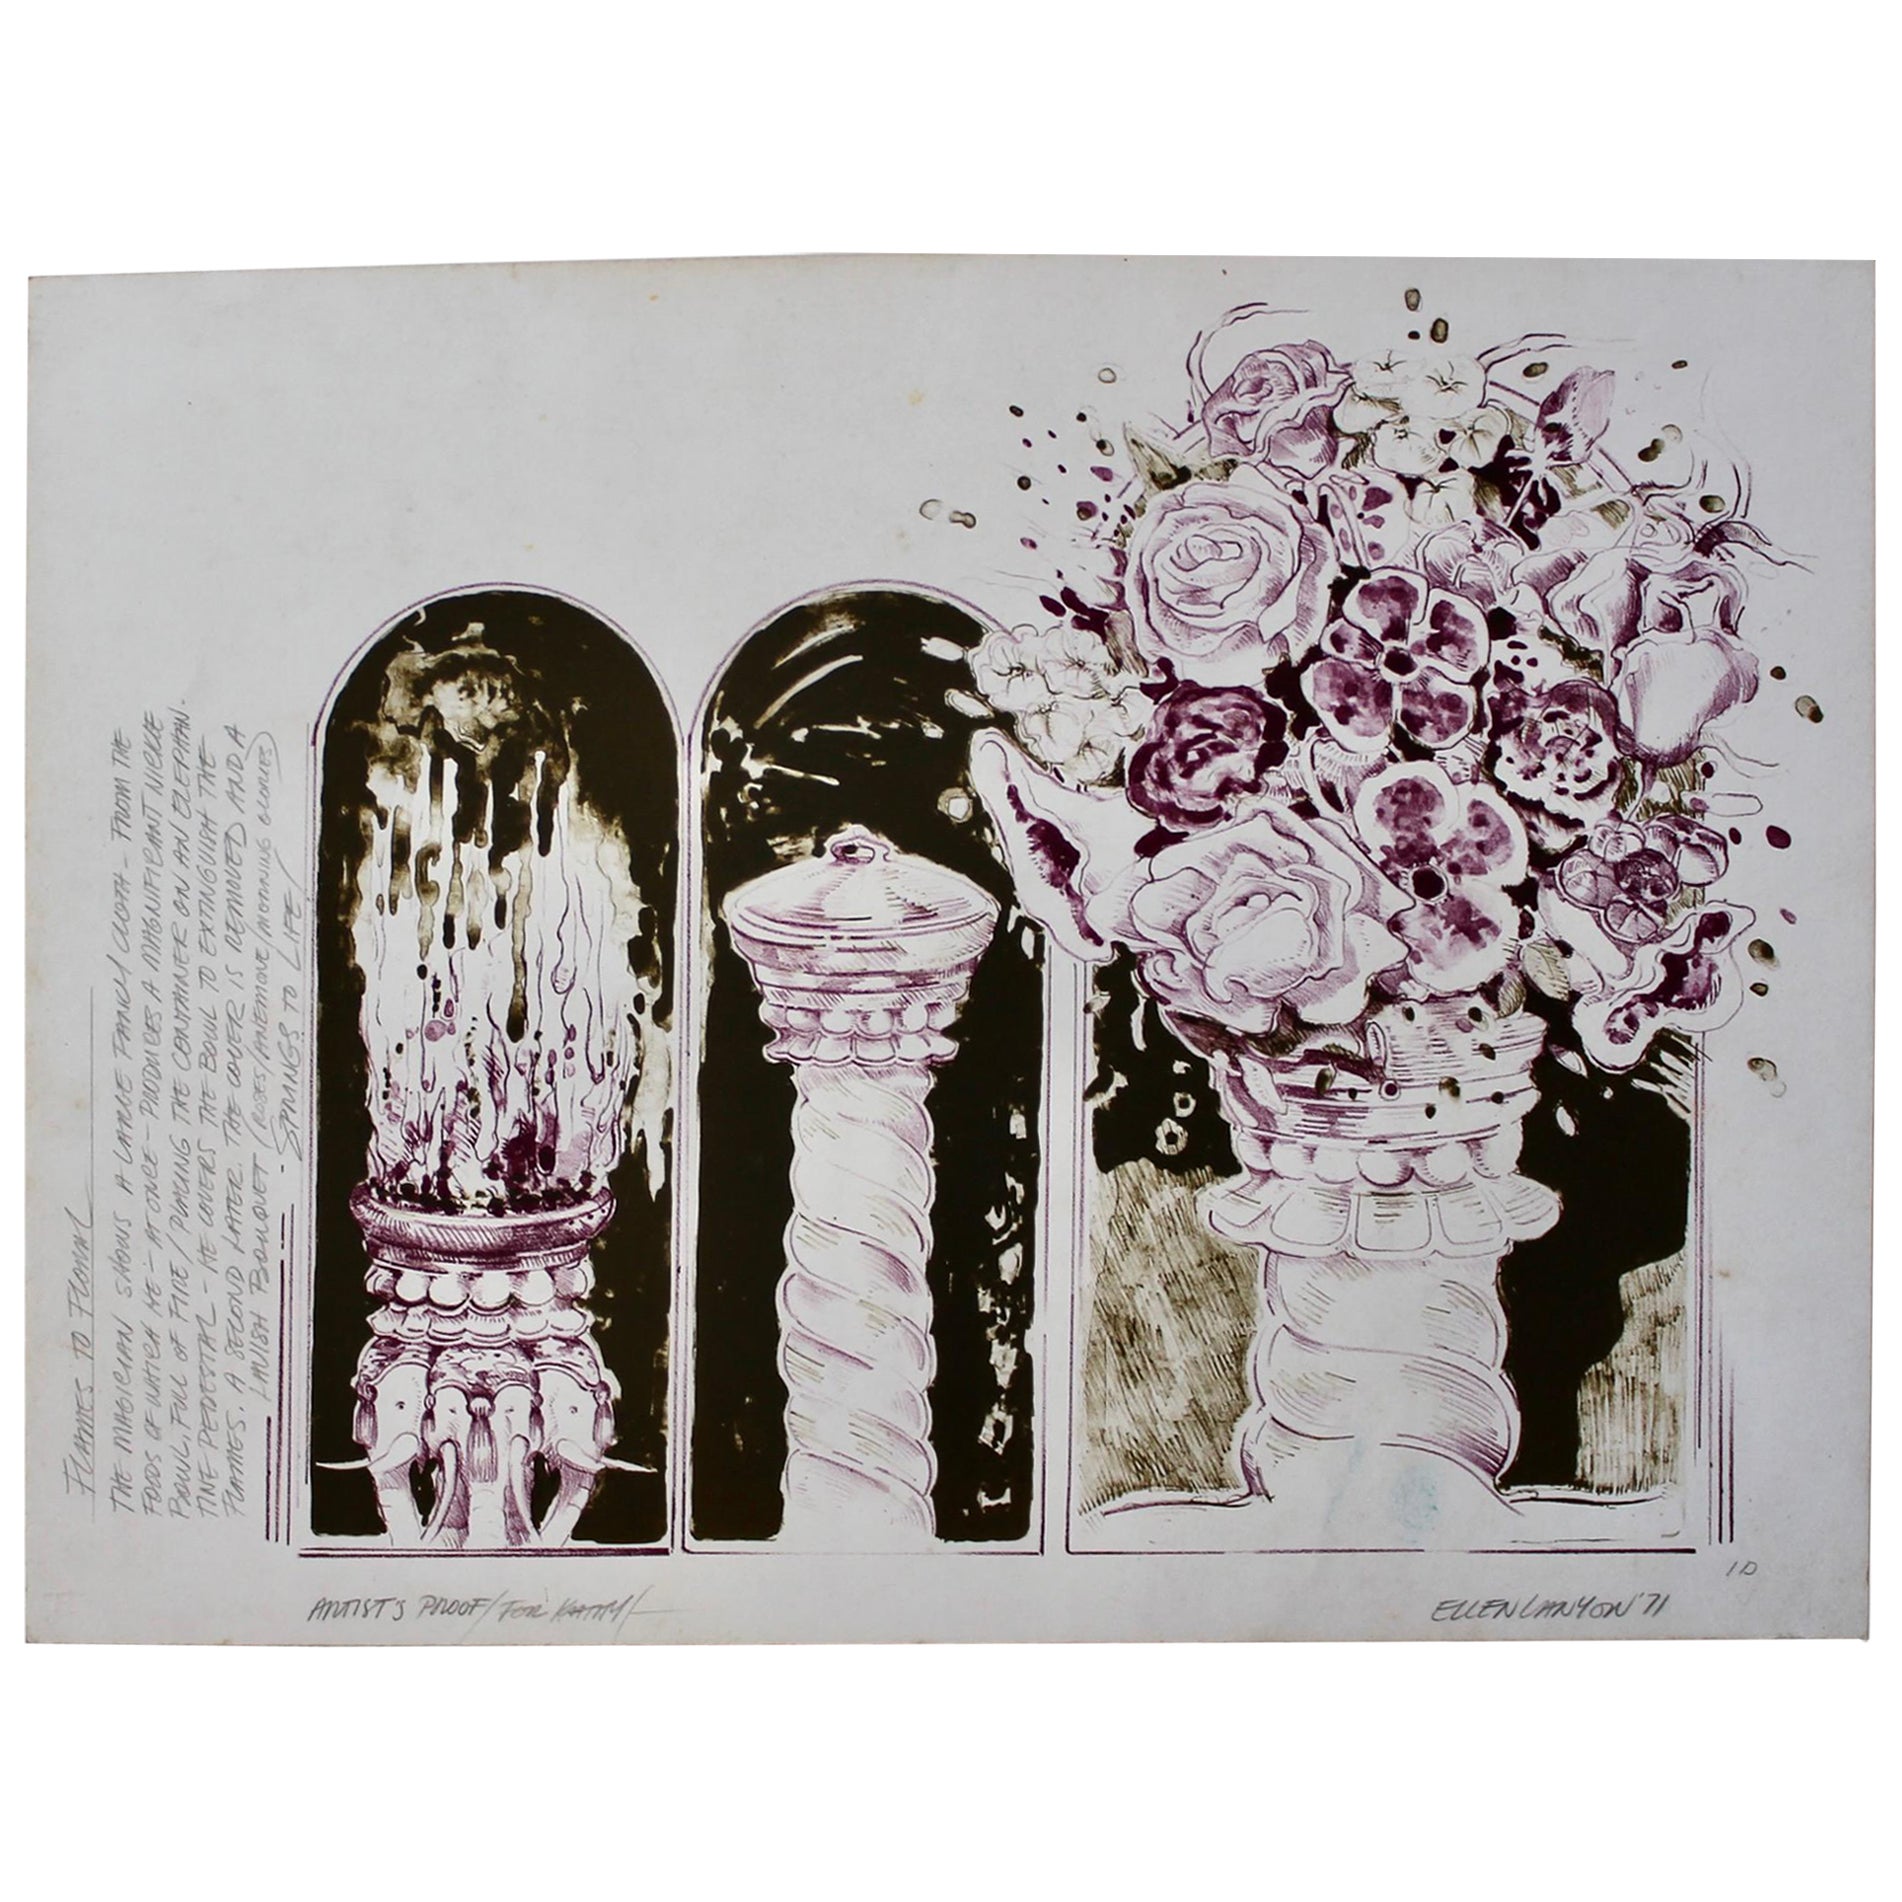 Ellen Lanyon '1926-2013' "Flames to Floral" annotated Landfall Press Lithograph